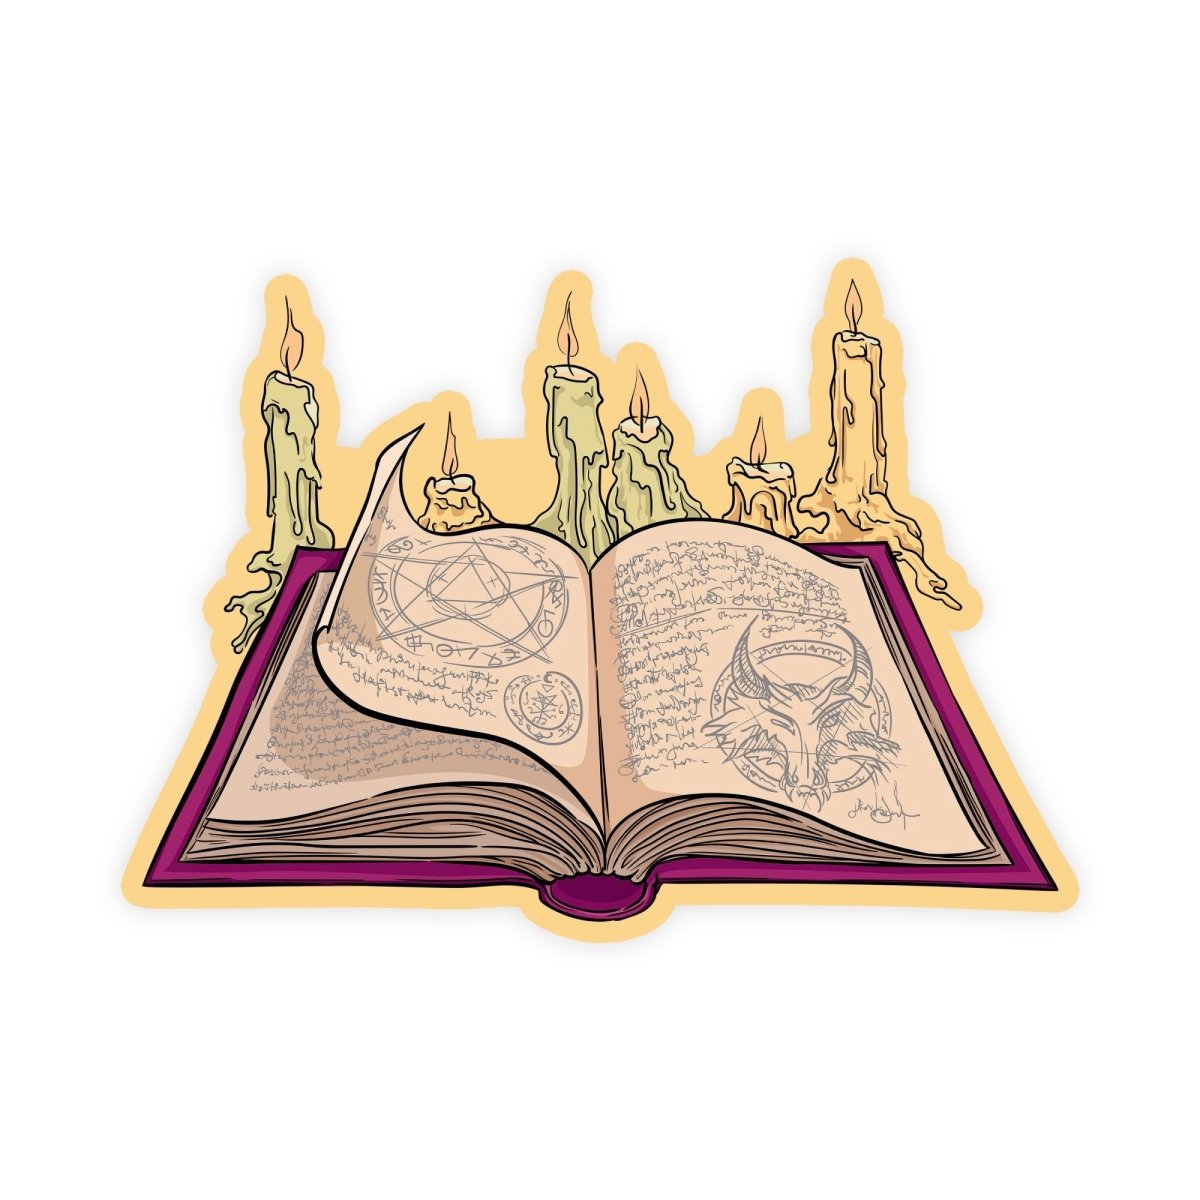 The Book Of The Occult Mystic Sticker - stickerbullThe Book Of The Occult Mystic StickerStickersstickerbullstickerbullSage_OccultBookThe Book Of The Occult Mystic Sticker